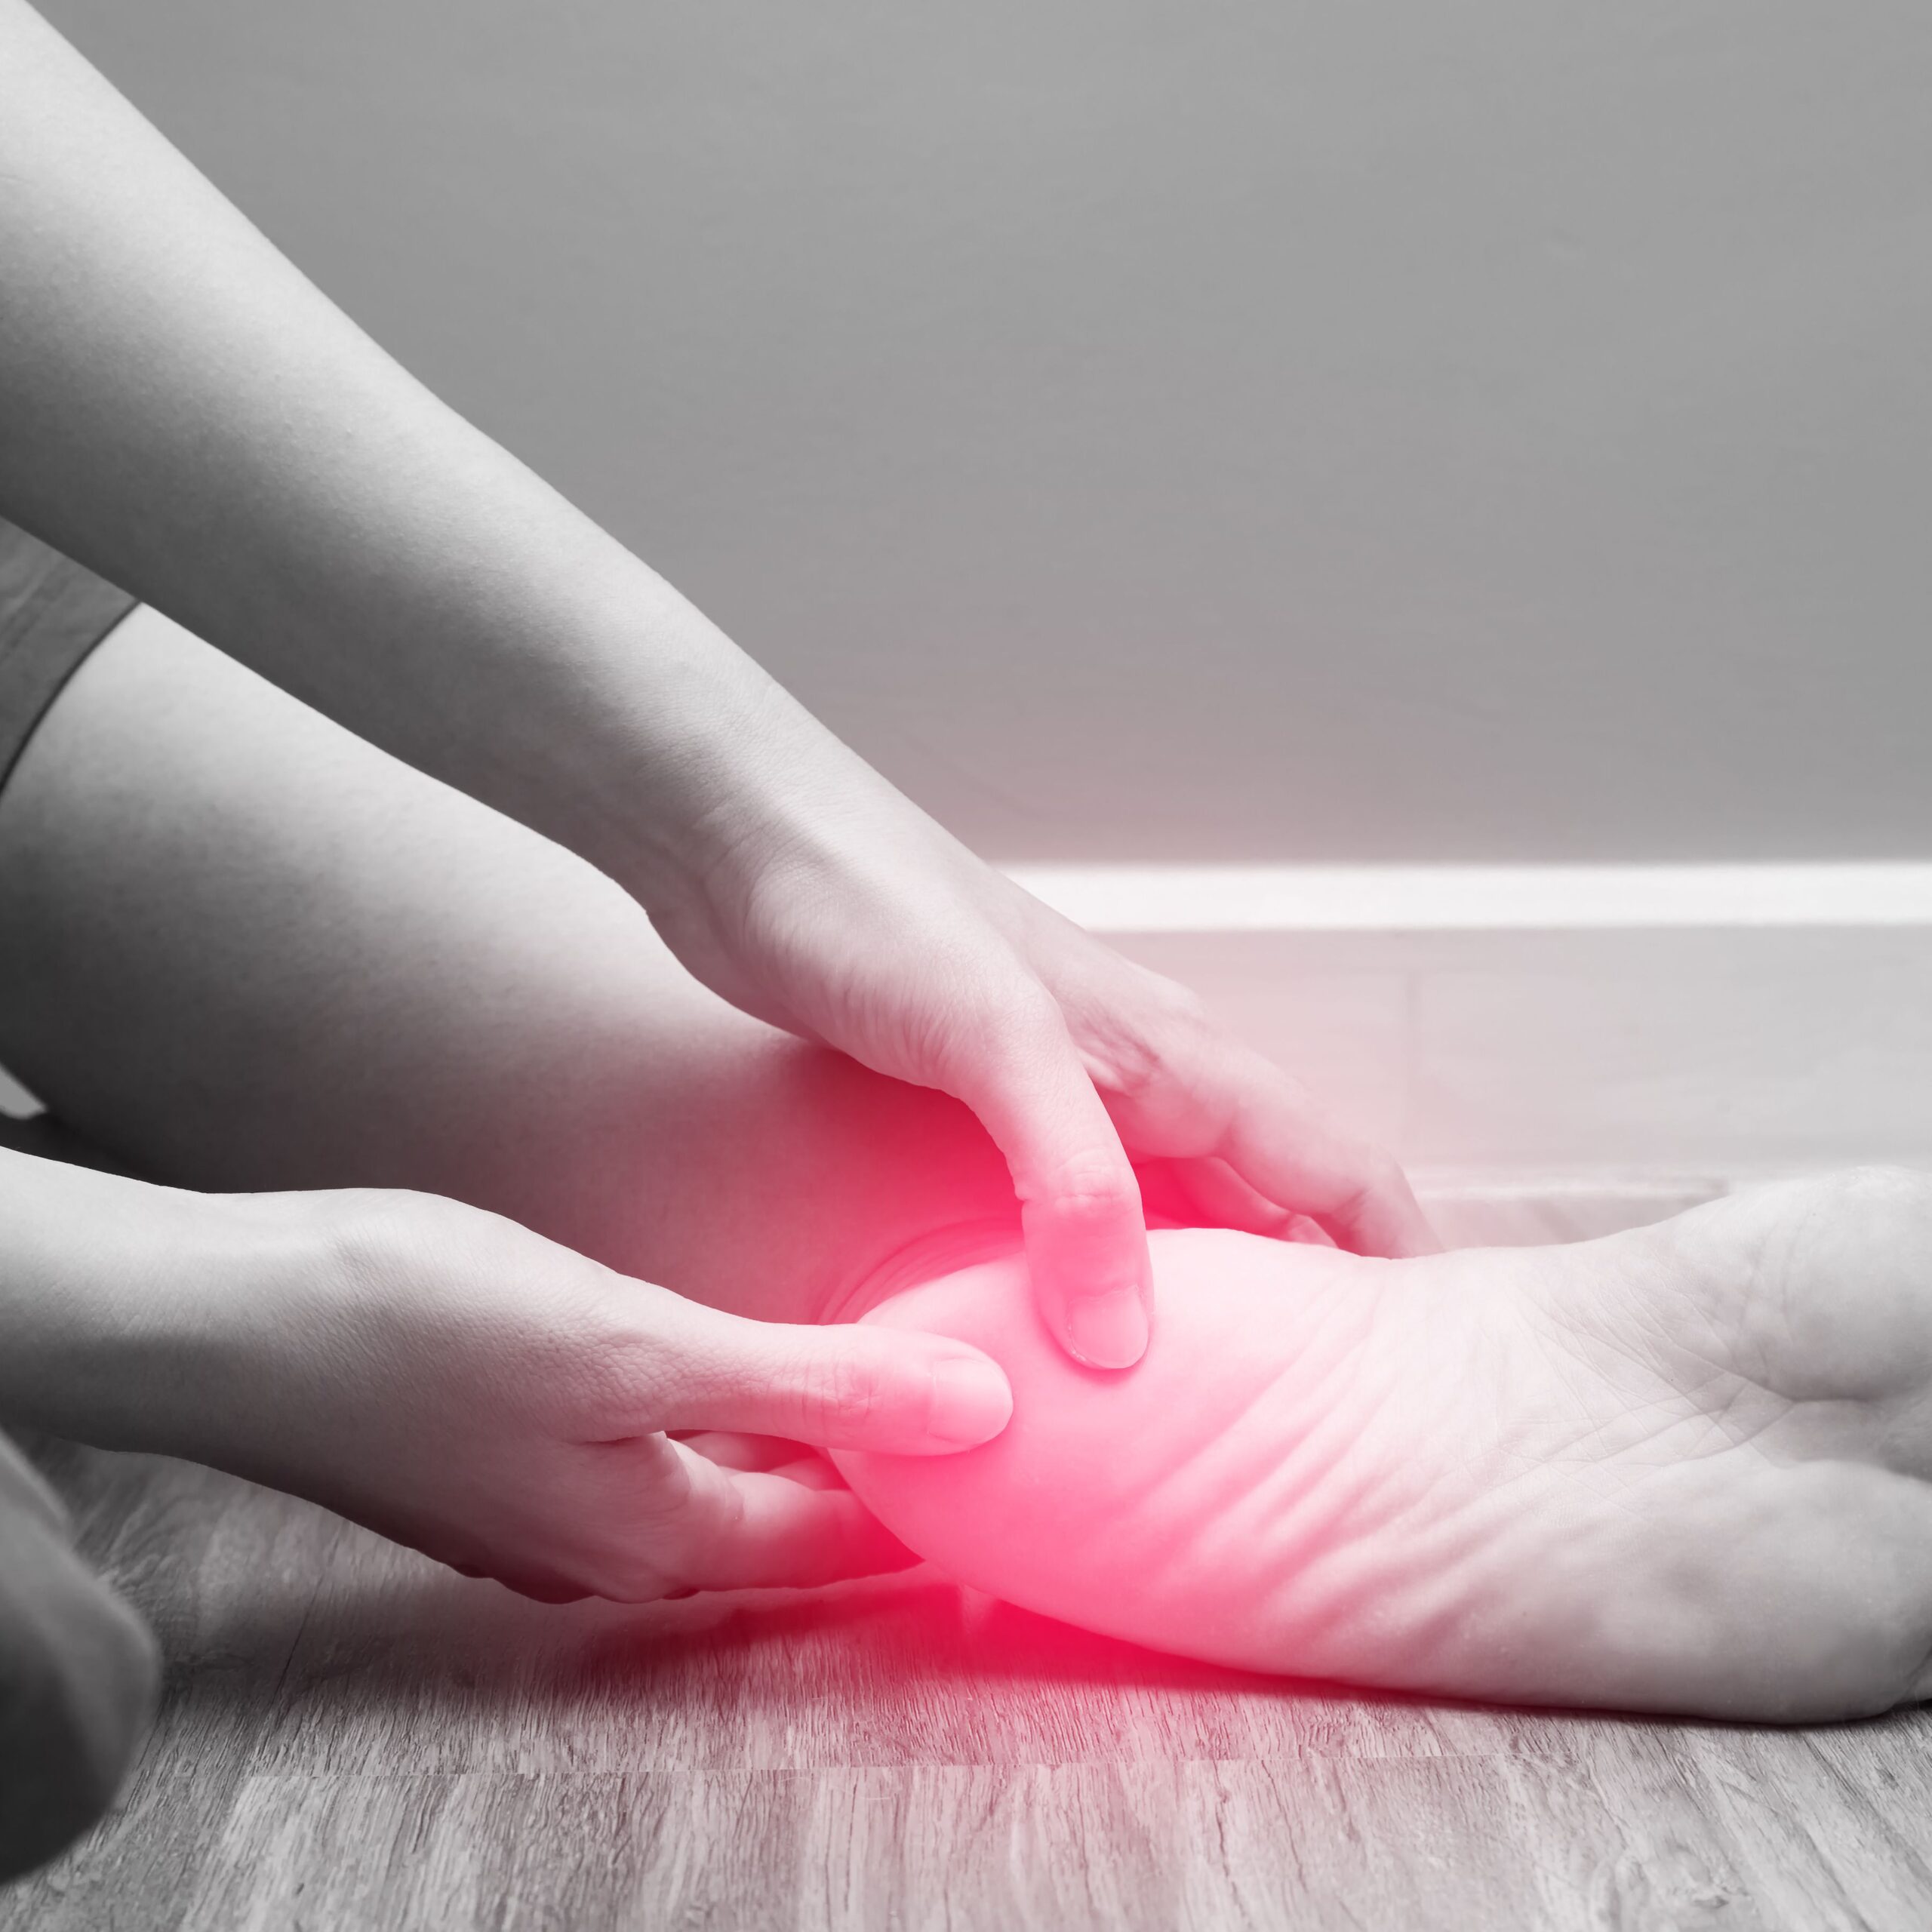 How To Test For Plantar Fasciitis